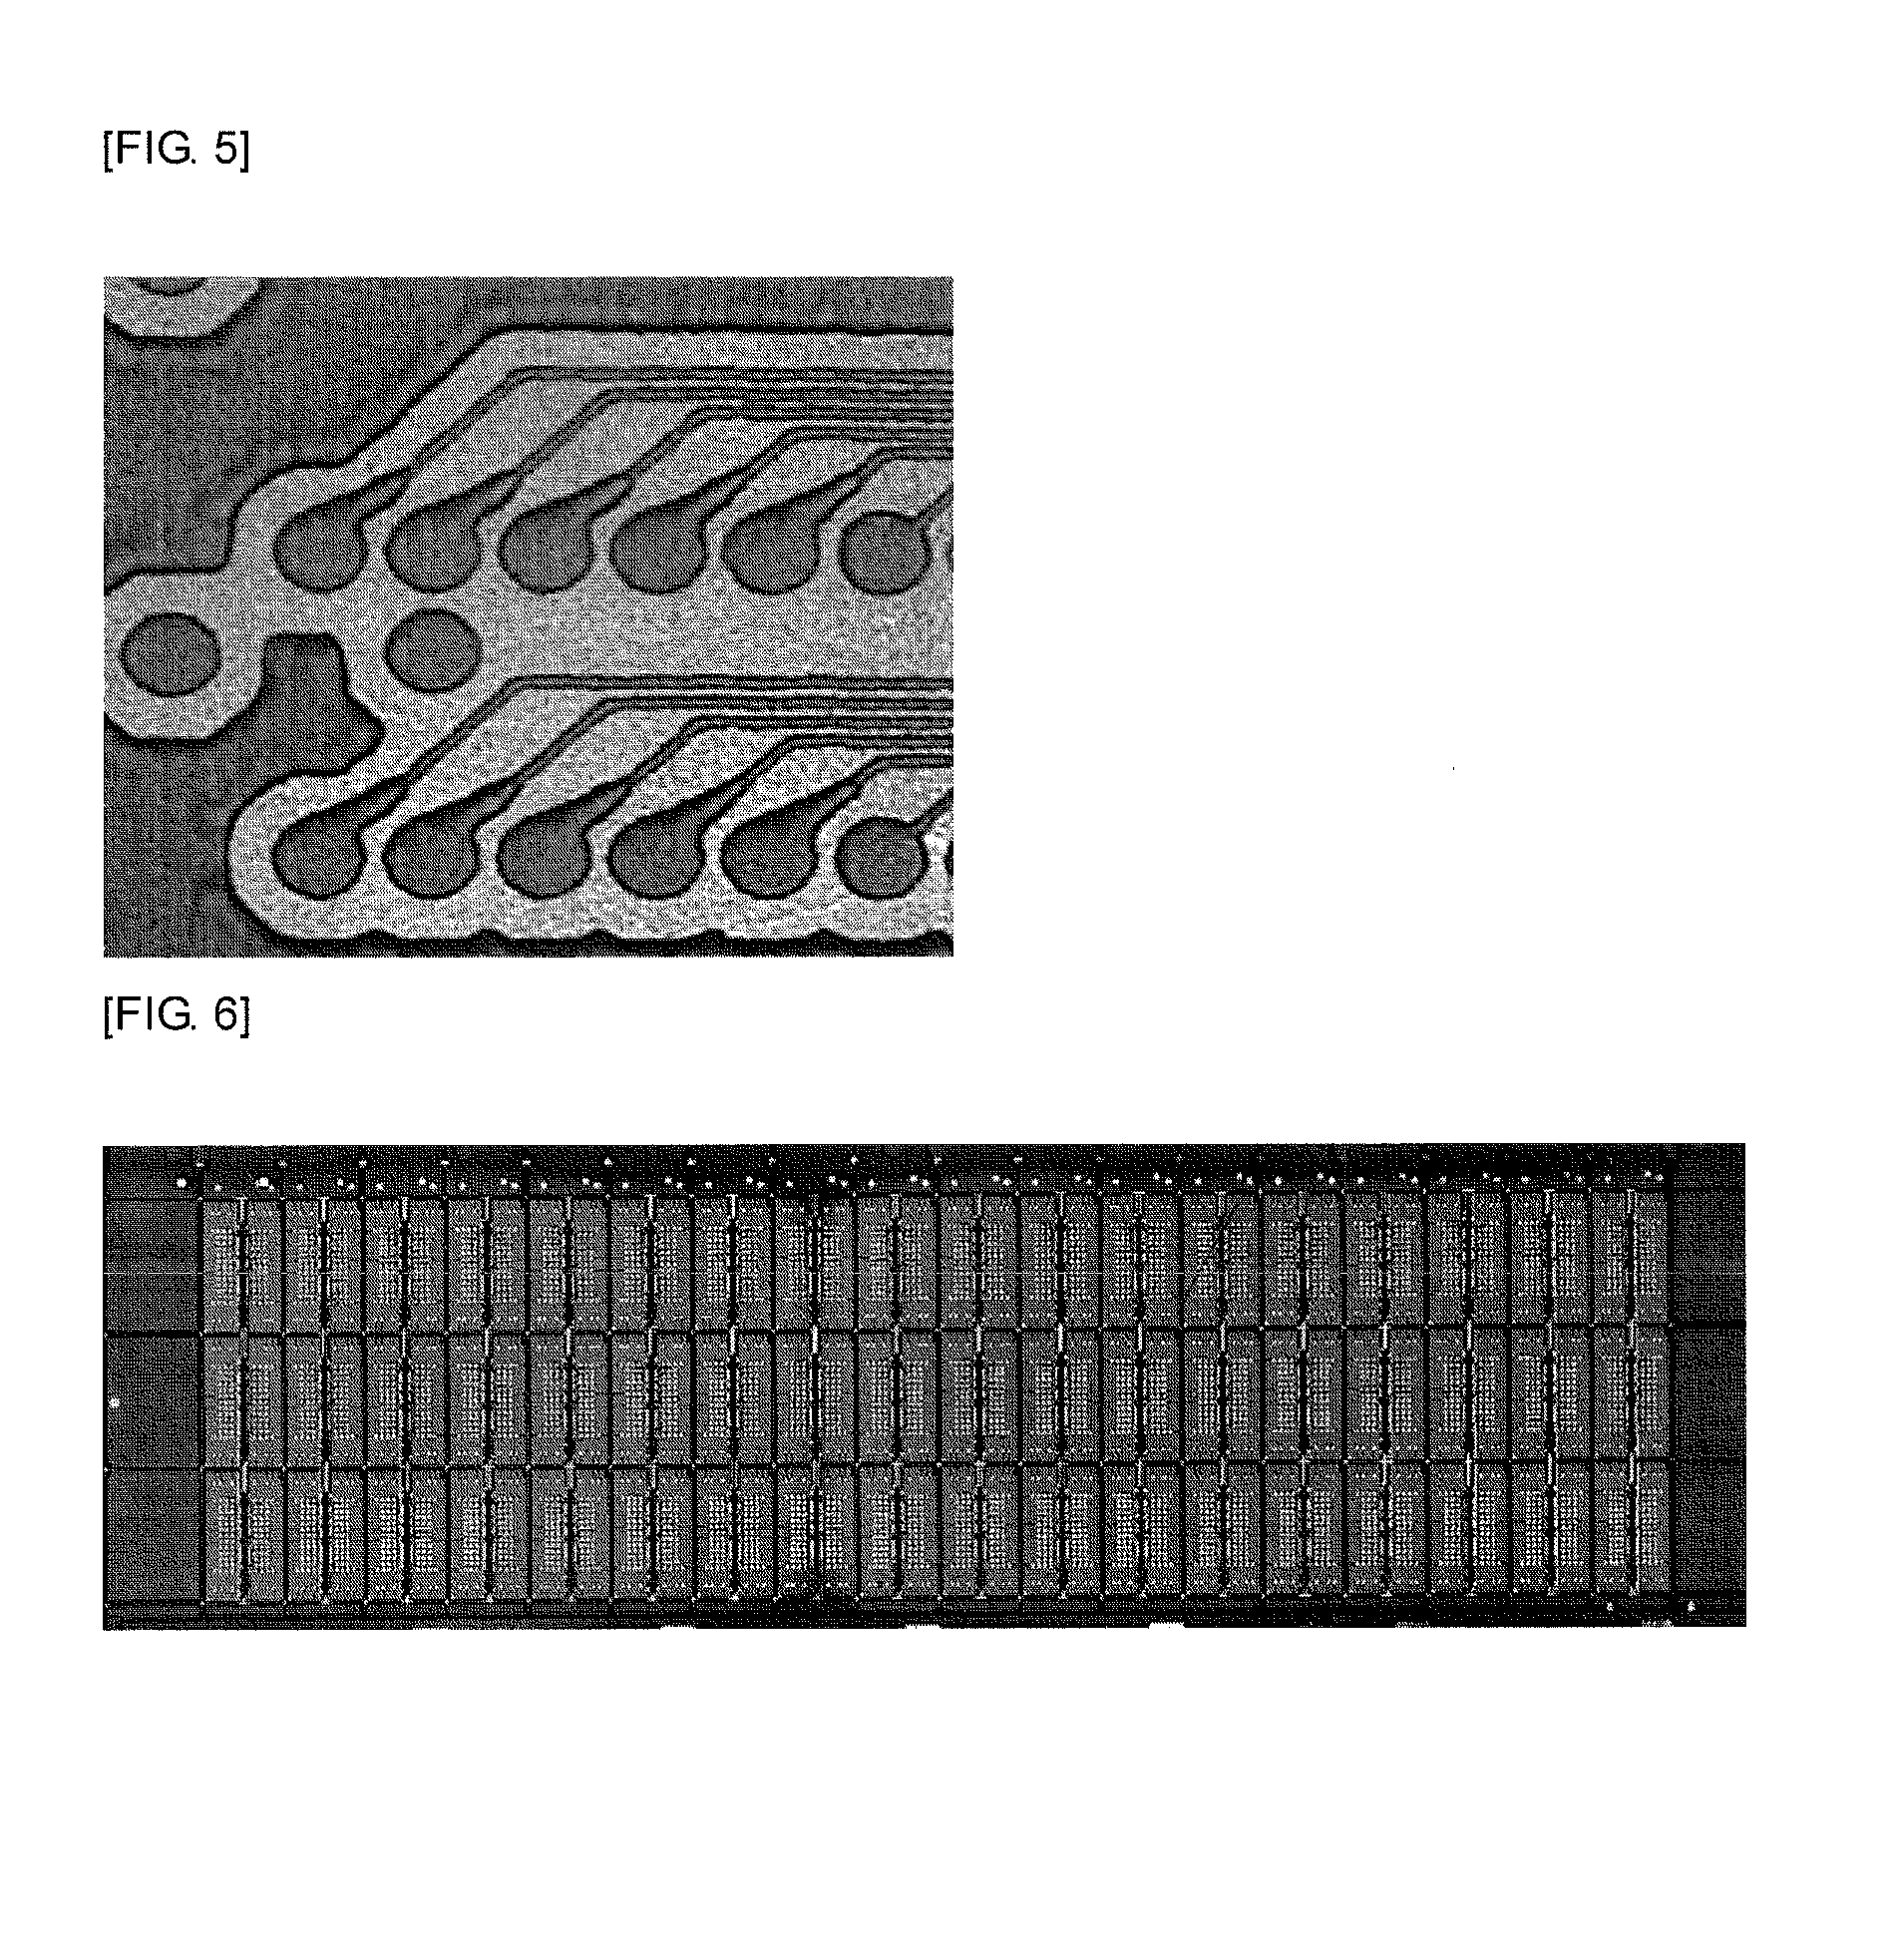 Insulating composition, substrate including insulating layer using the same, and method for manufacturing the substrate